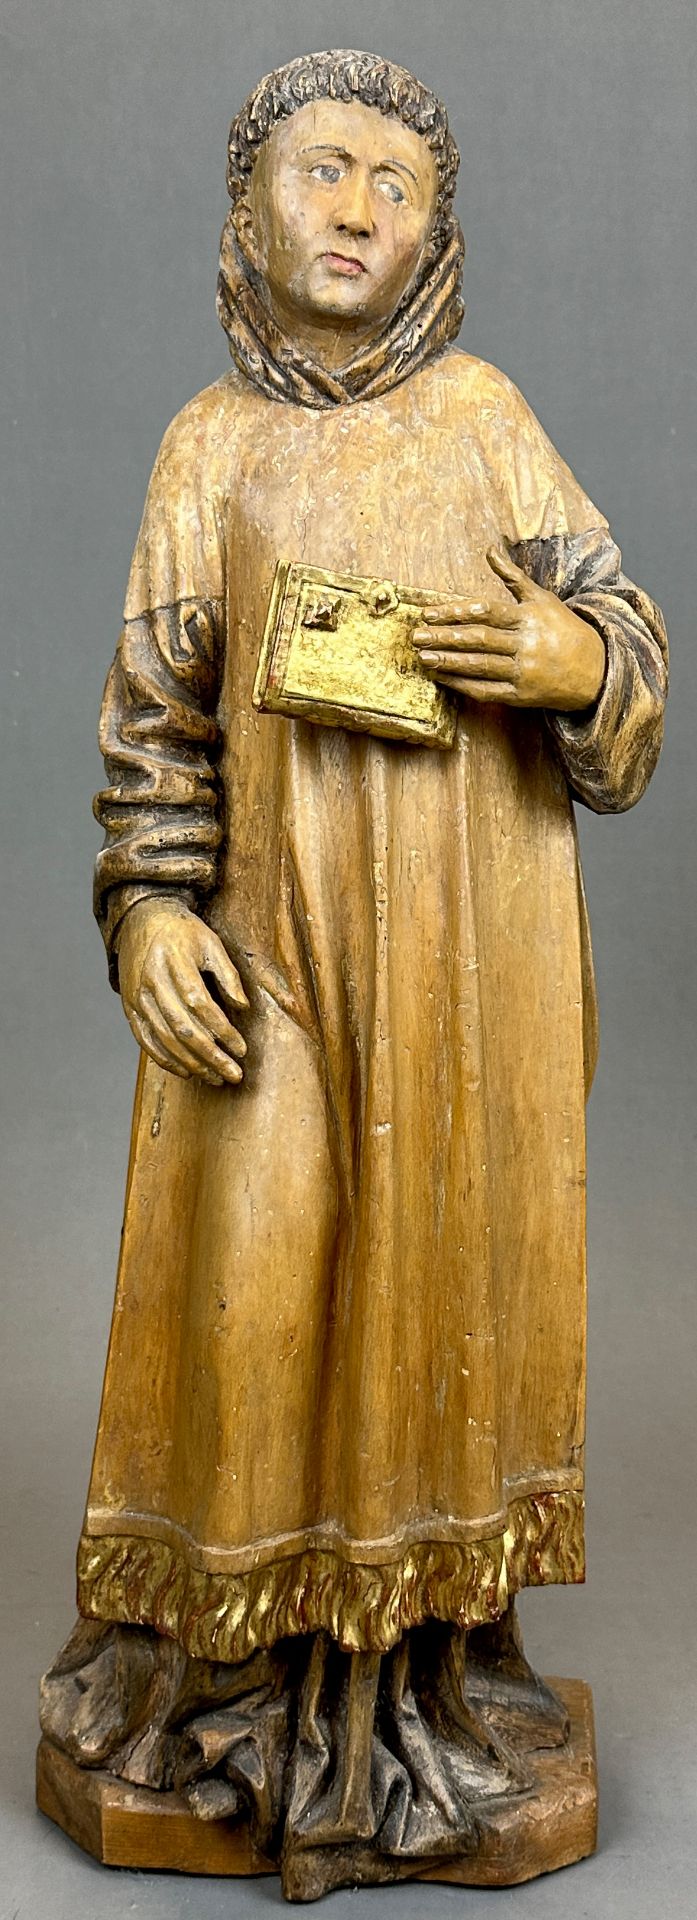 Wooden figure. Monk with book. Last third of the 17th century. South Germany.